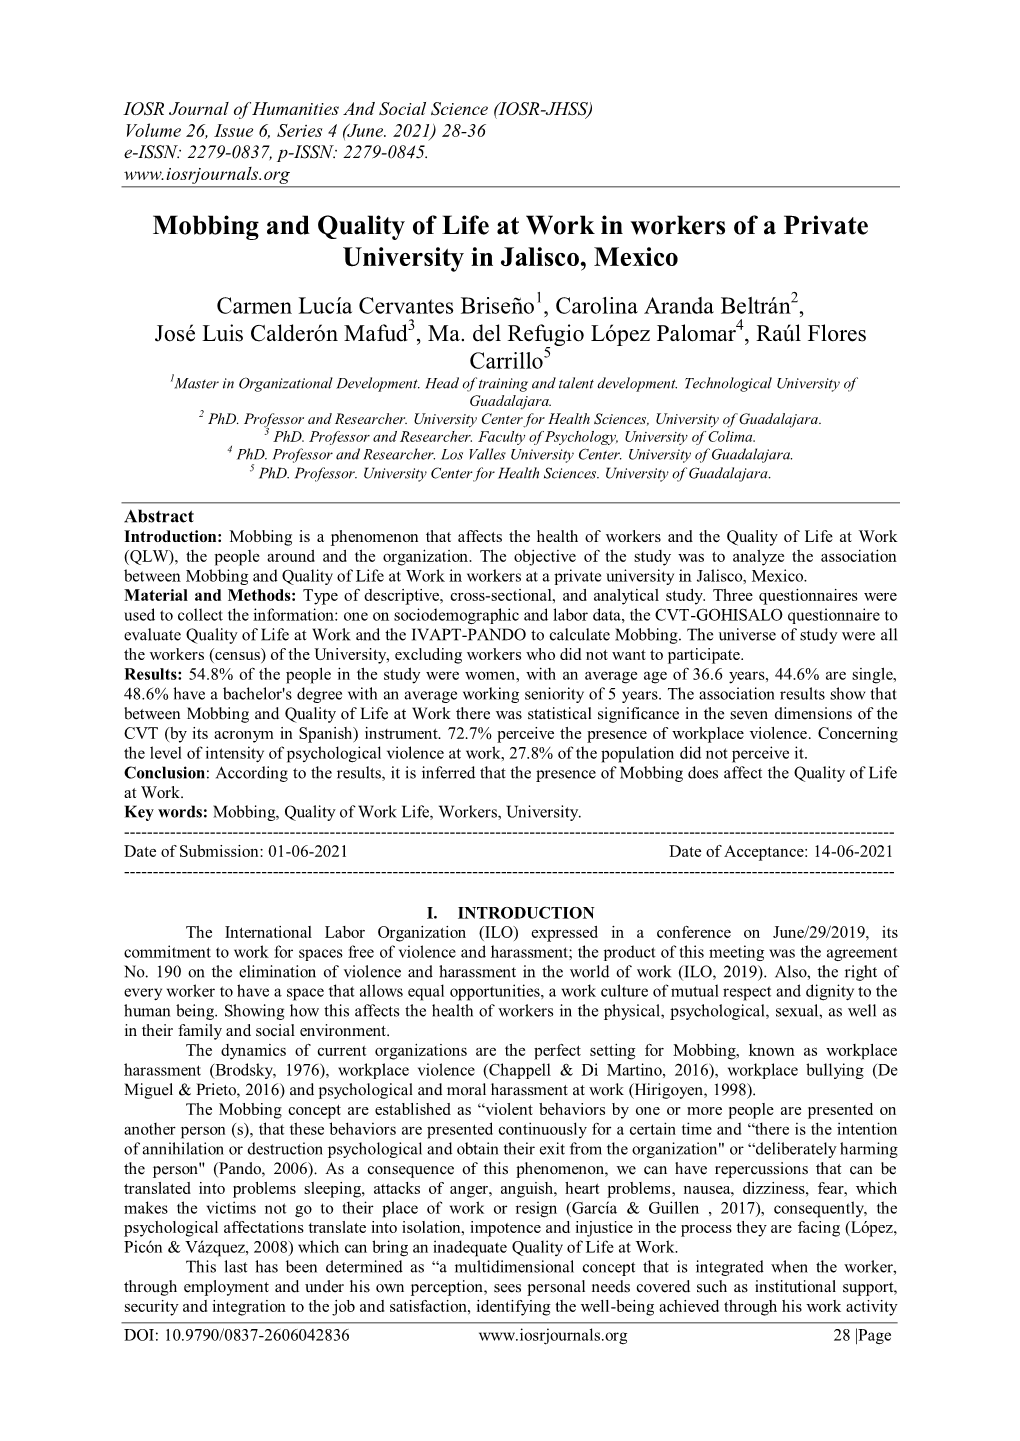 Mobbing and Quality of Life at Work in Workers of a Private University in Jalisco, Mexico